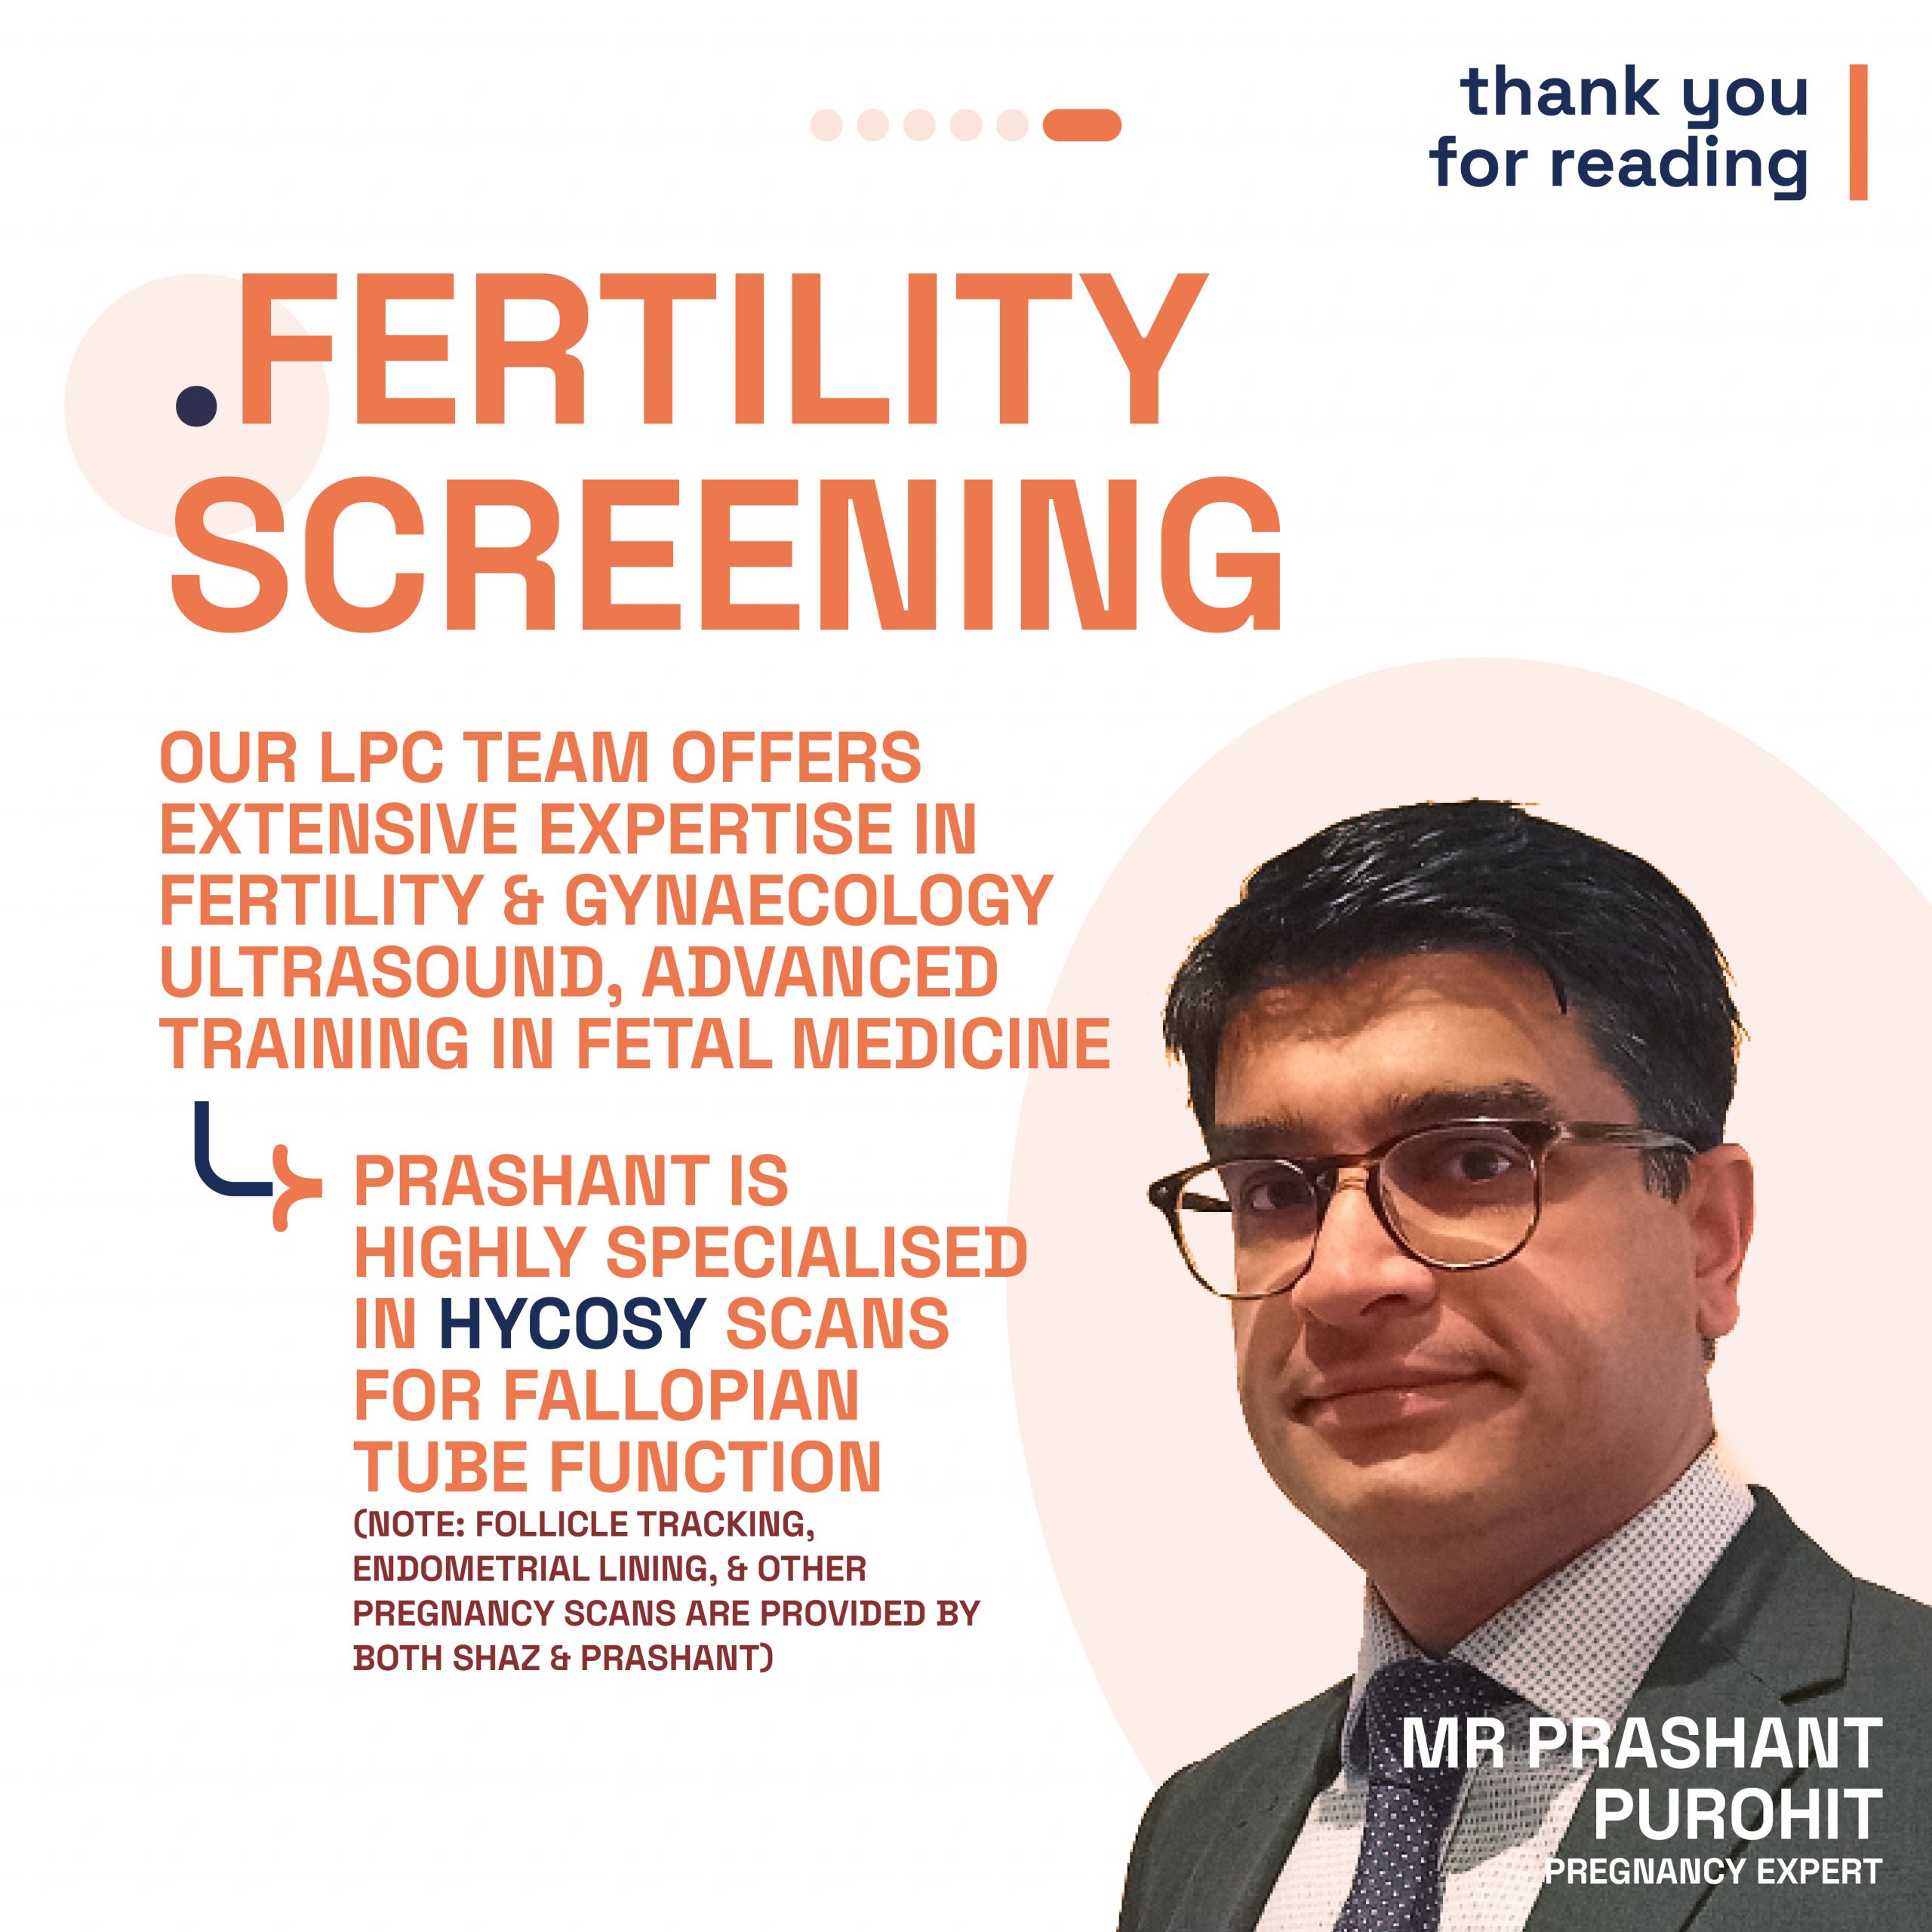 Image of Mr. Prashant Purohit with text highlighting London Pregnancy Clinic's expertise in fertility and gynaecology ultrasound.